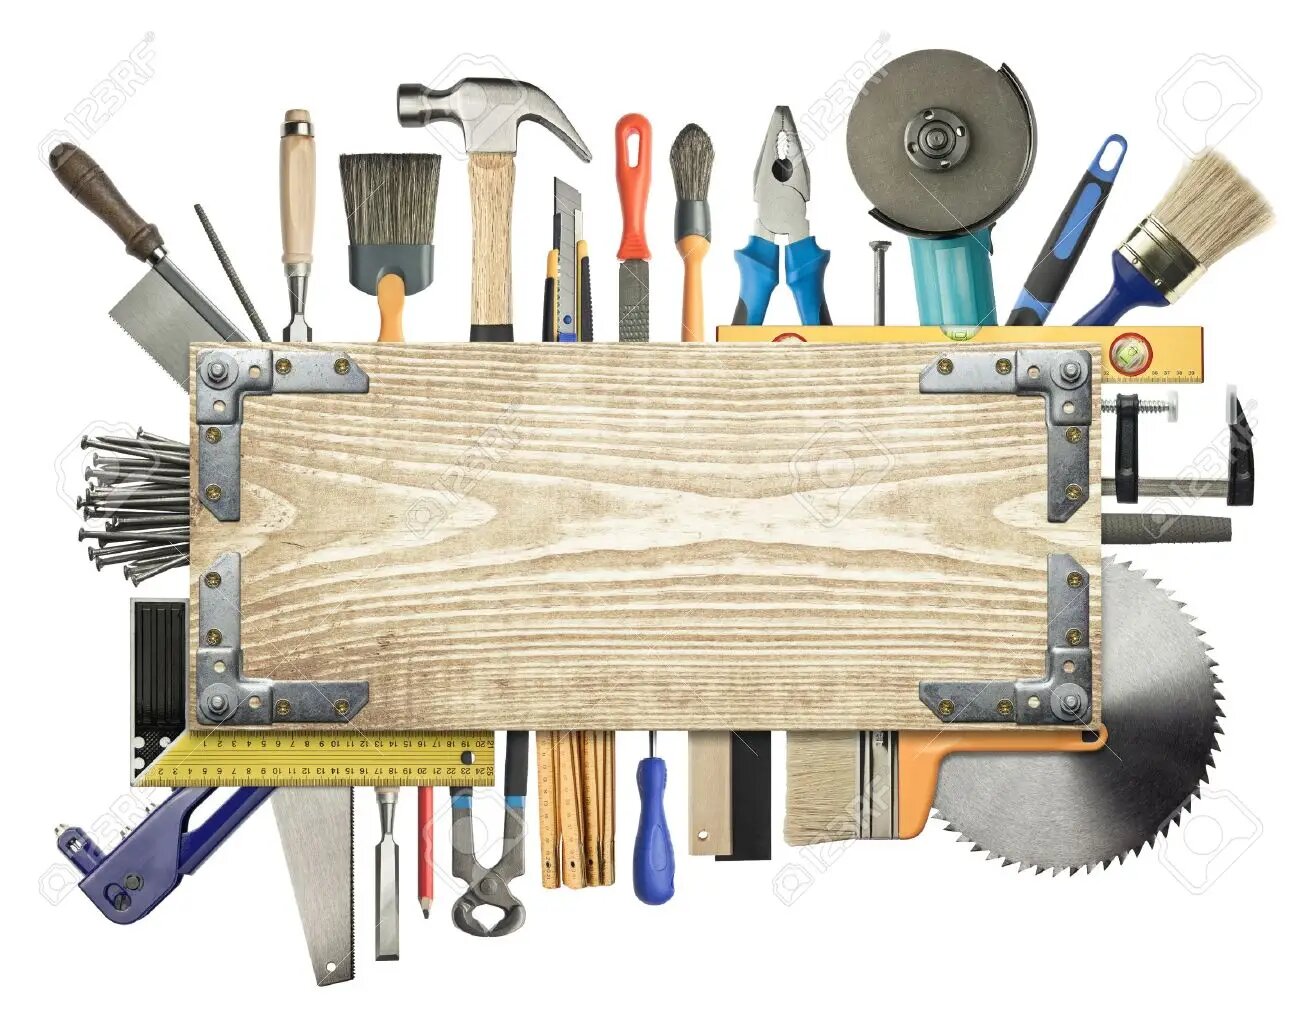 12781860-carpentry-construction-background-tools-underneath-the-wood-plank-